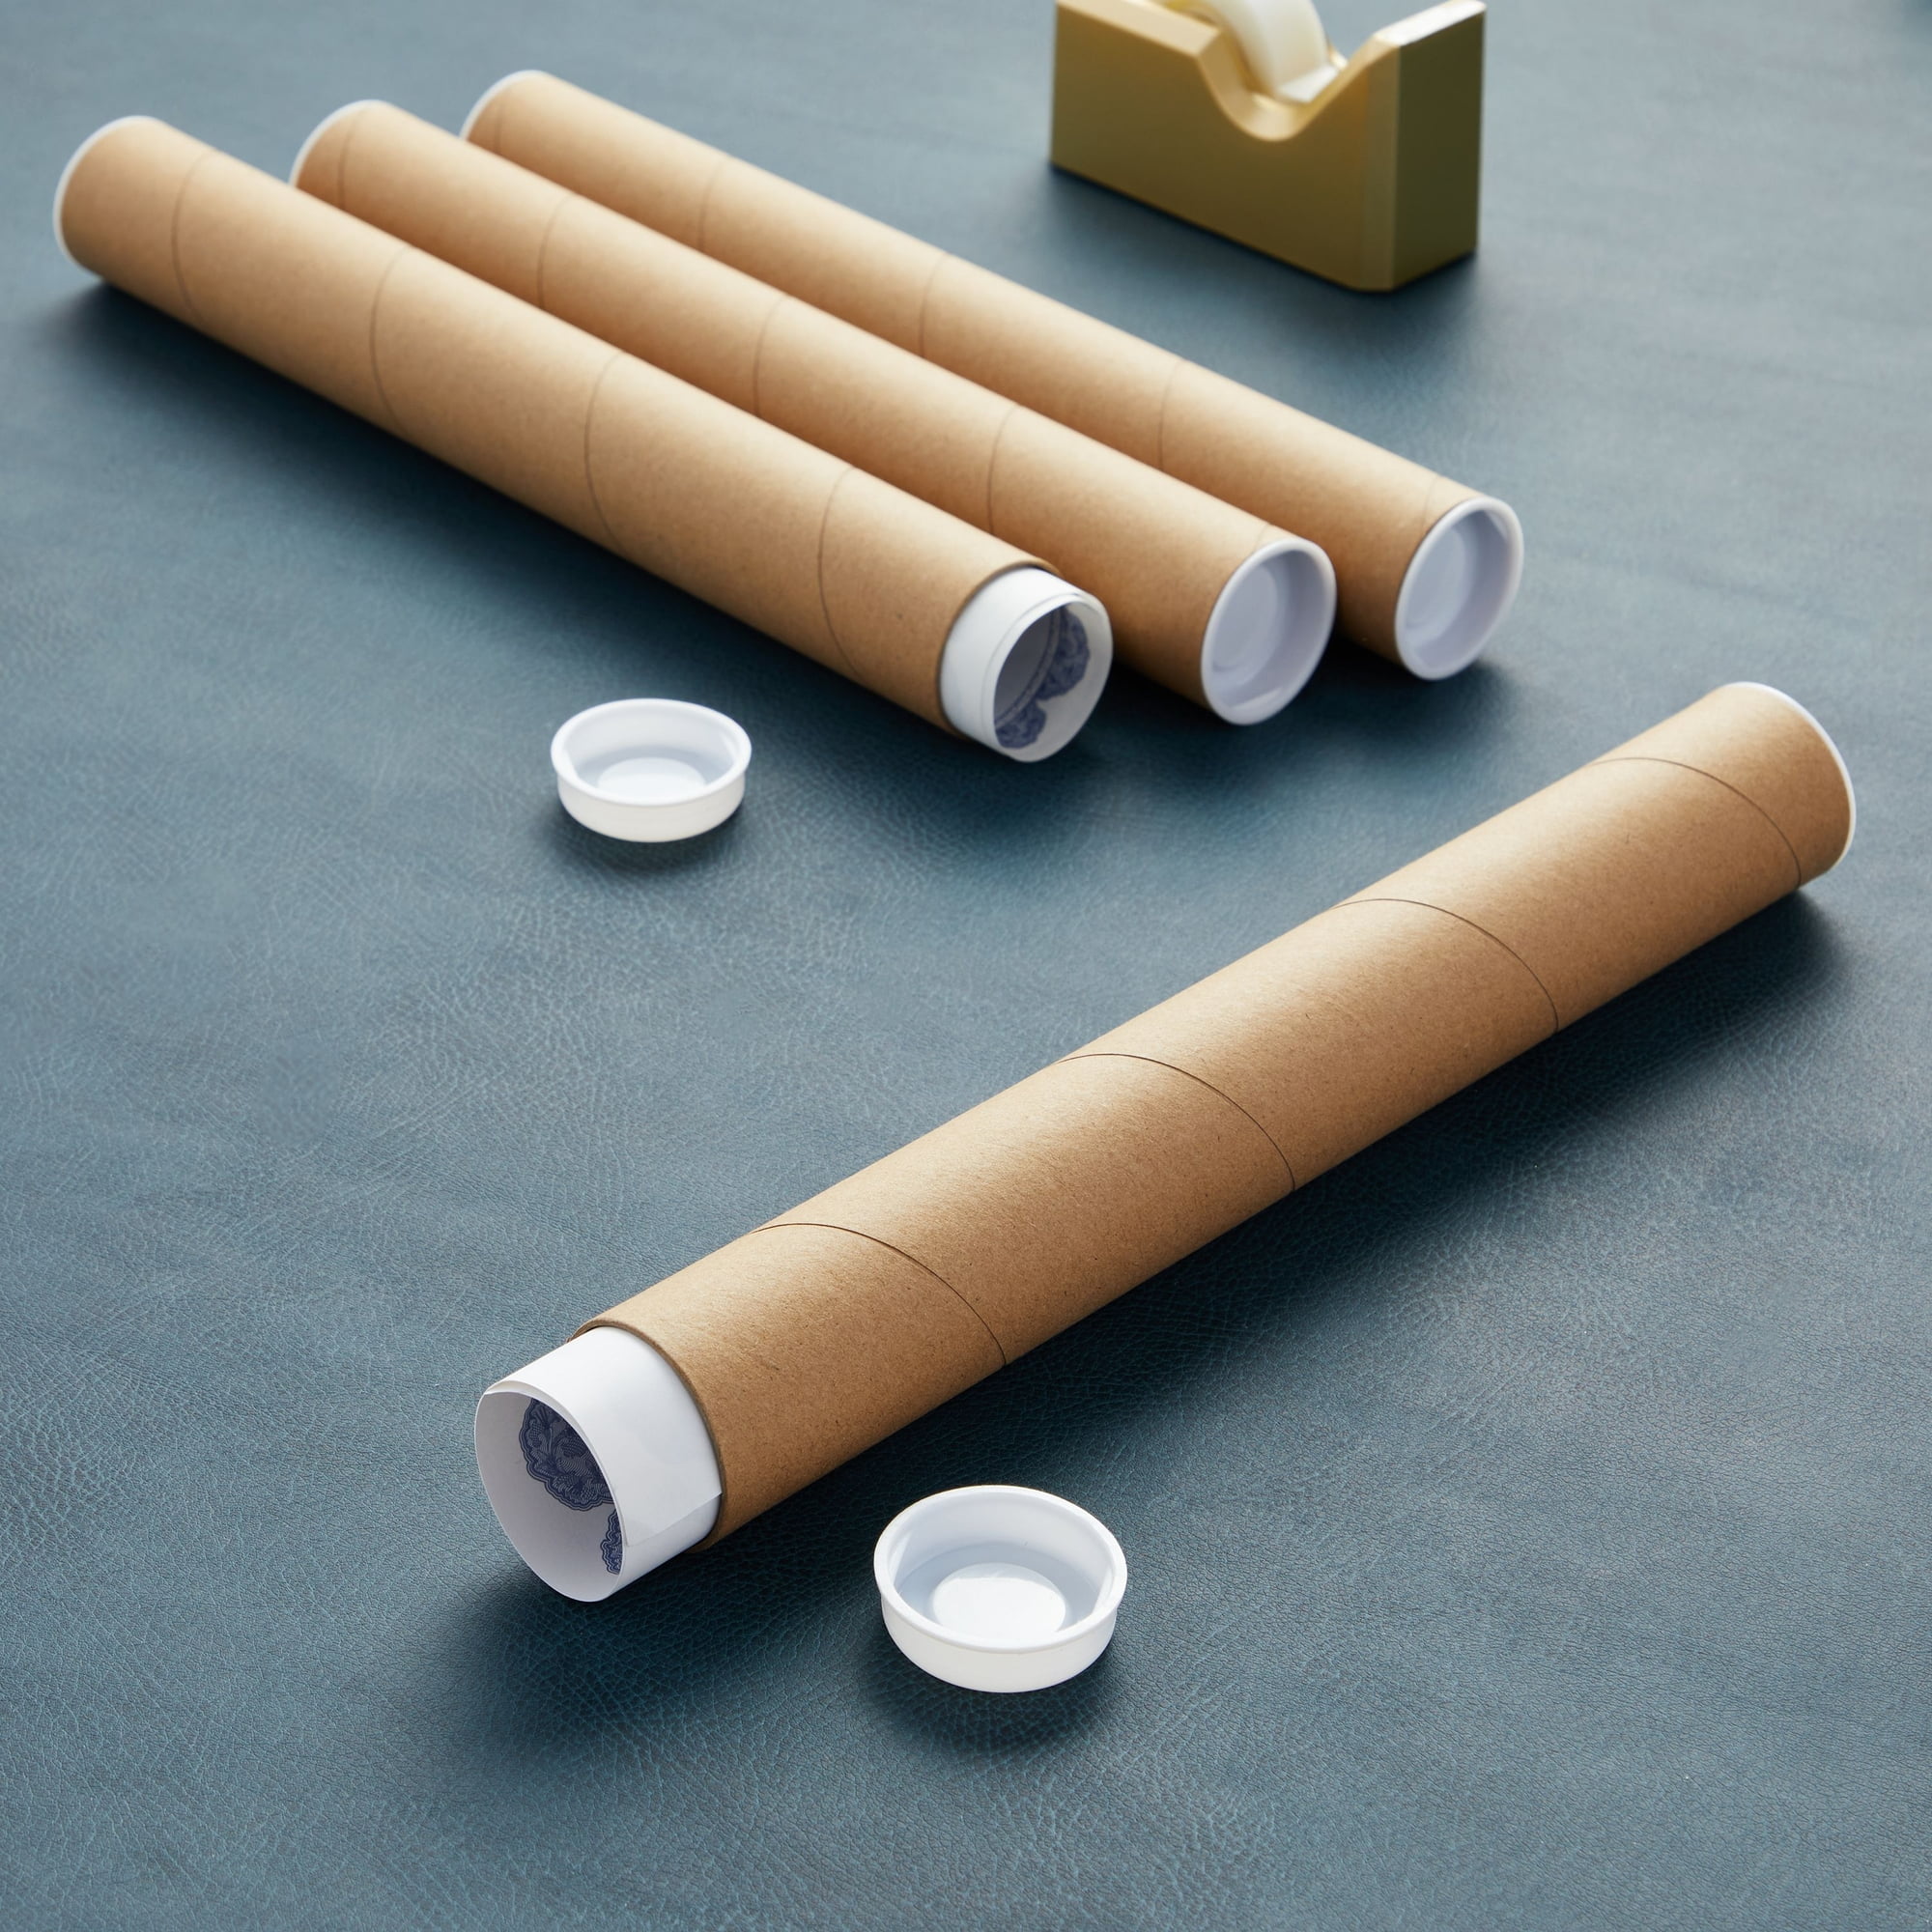 Stockroom Plus 12-Pack Mailing Tubes with Caps, 1.5x12-Inch Kraft Paper Poster Tube for Shipping, Packing, Bulk Round Packaging, Cardboard Mailers